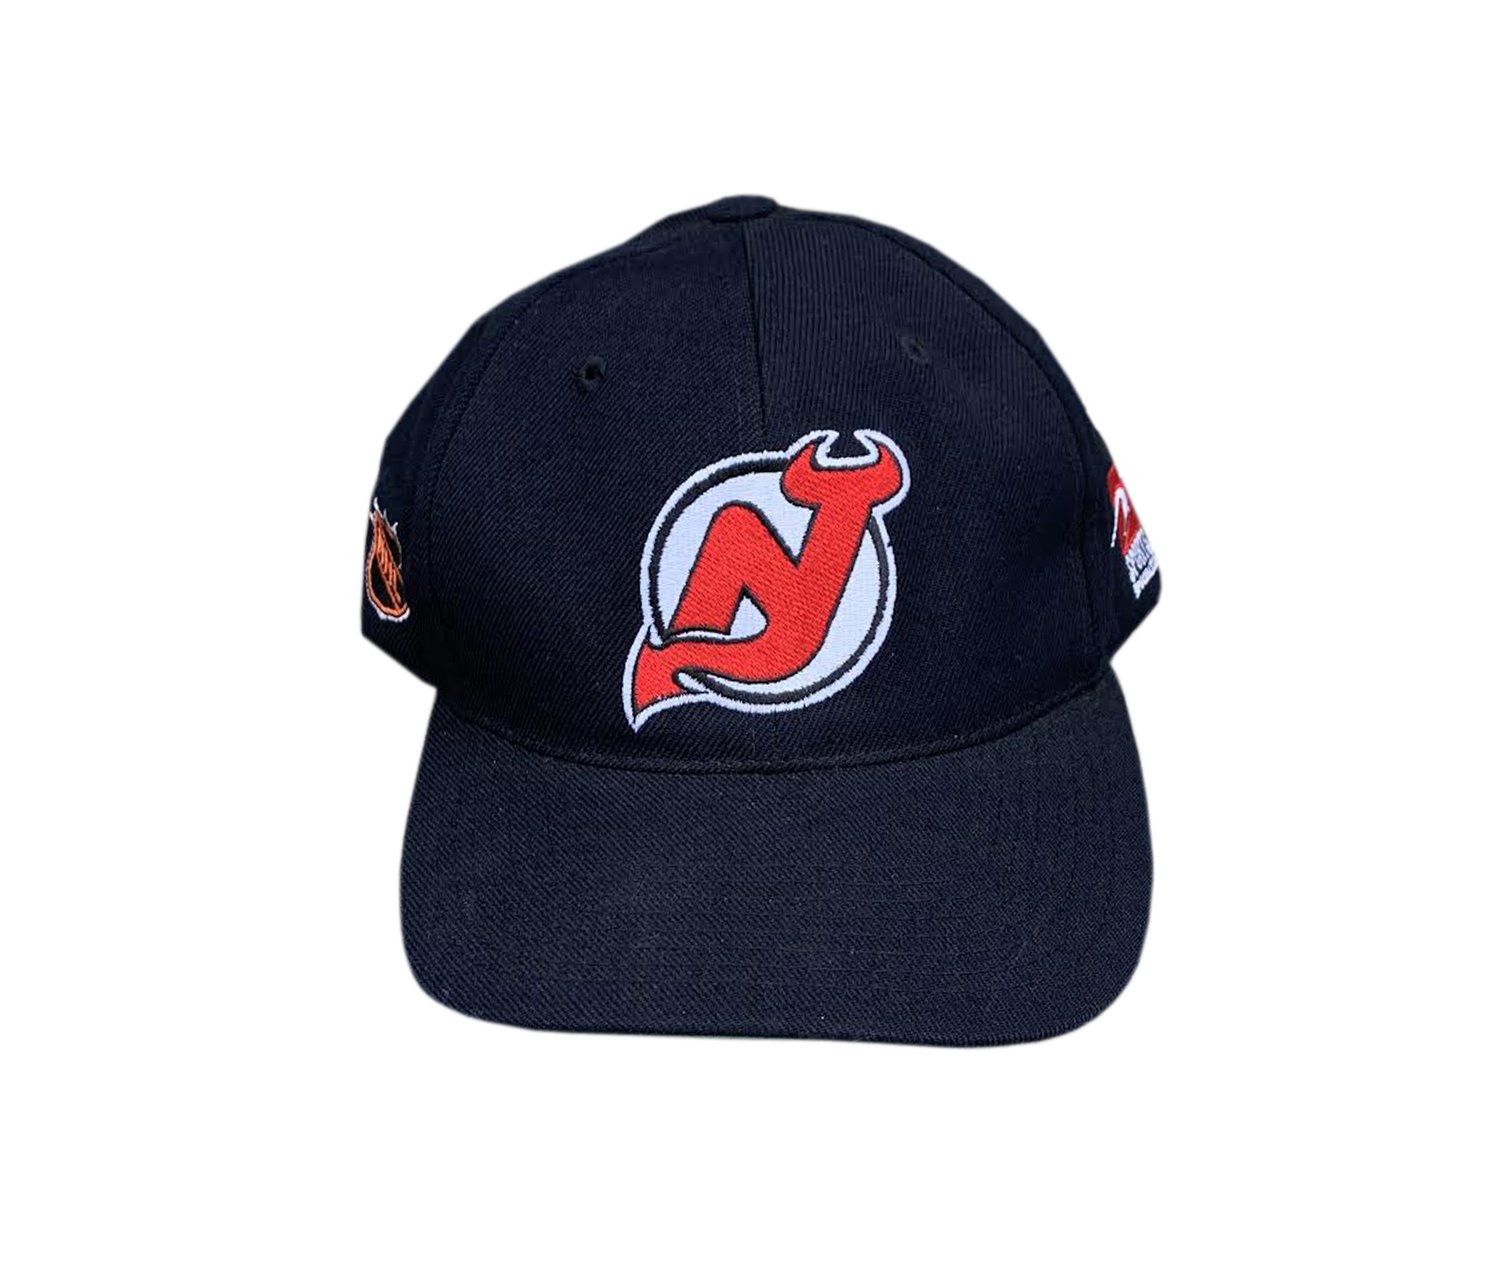 New Jersey Devils Signed Hats, Collectible Devils Hats